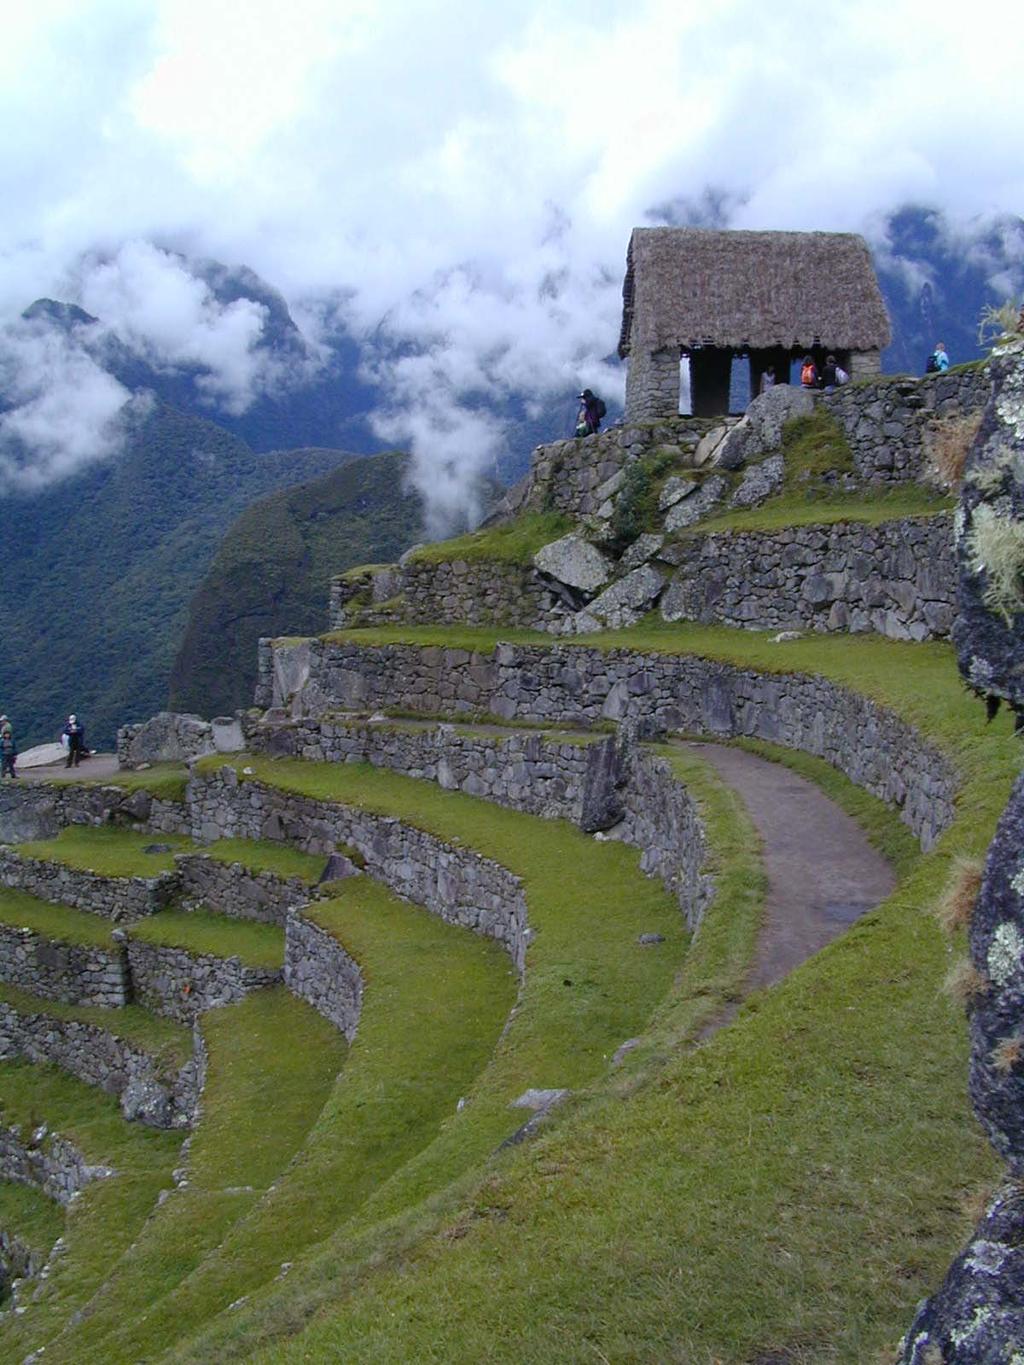 A view of the Machu Picchu sentry house and some of the agricultural terraces below its west side, before the clouds drifted away.